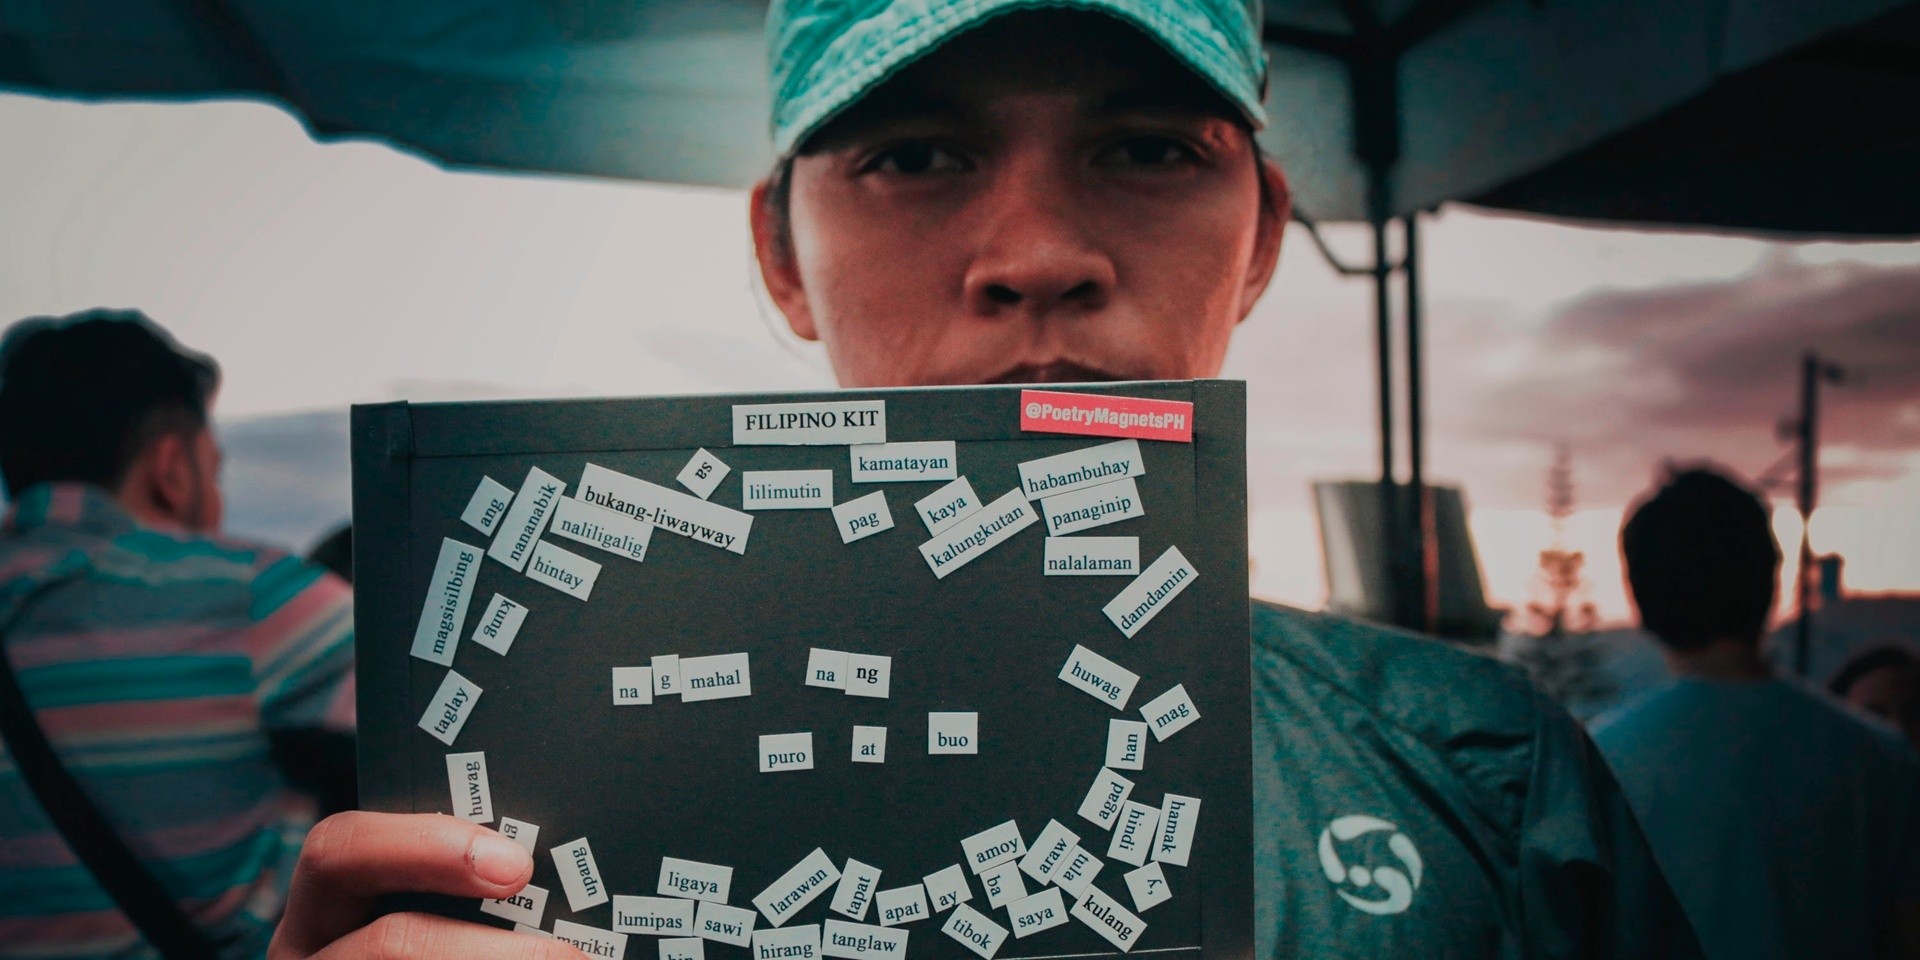 PHOTO GALLERY: Bullet Dumas, Tom's Story, crwn, and more artists have some fun with Poetry Magnets to tell us about their Tagaytay Art Beat experience